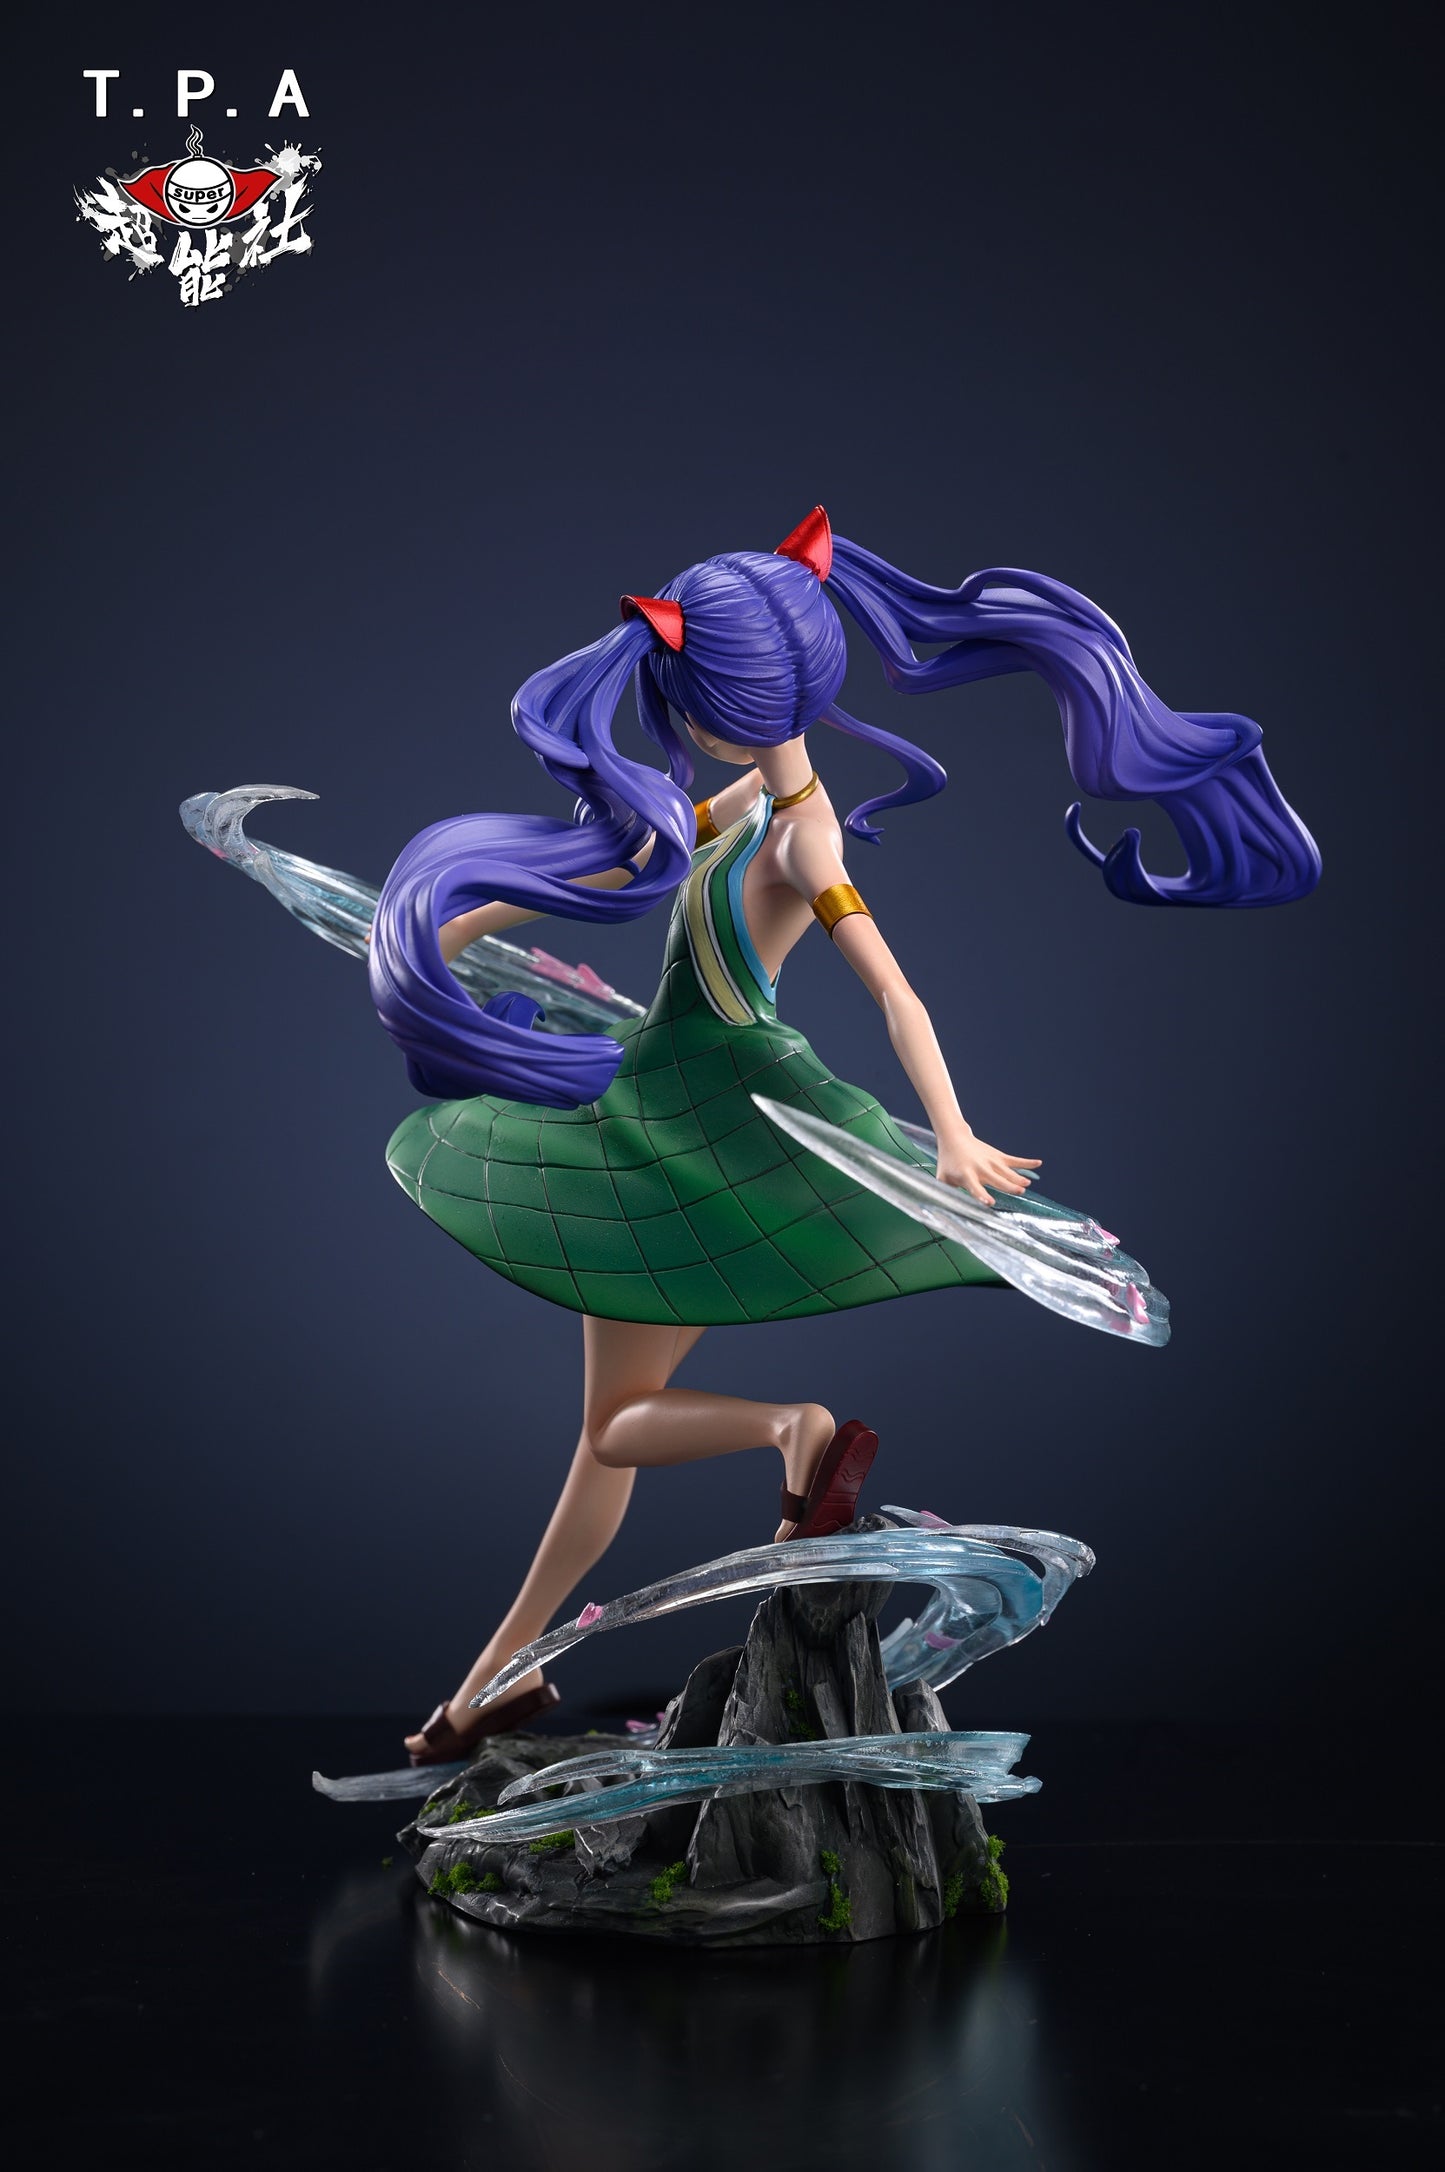 TPA Studio - Wendy Marvell [PRE-ORDER CLOSED]